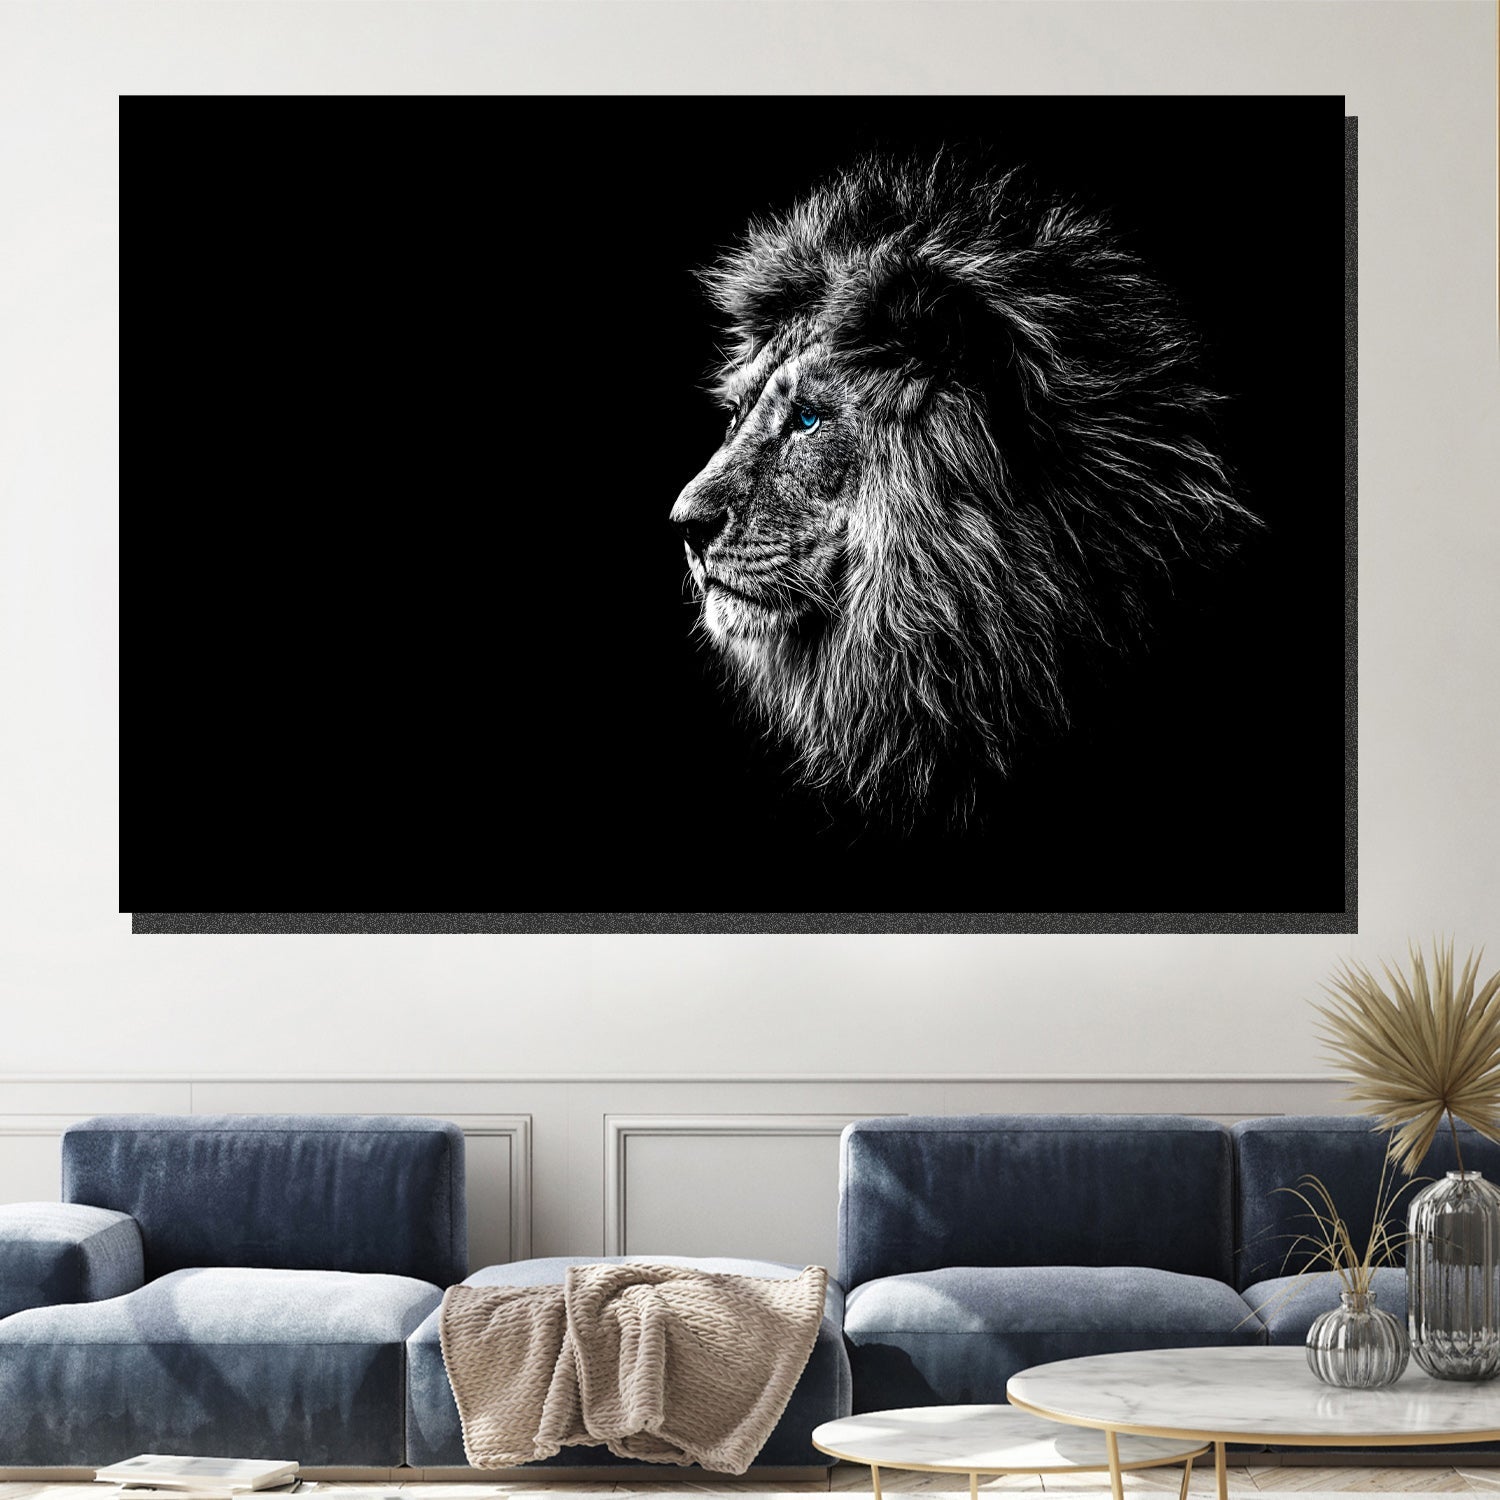 https://cdn.shopify.com/s/files/1/0387/9986/8044/products/MajesticLionCanvasArtprintStretched-4.jpg